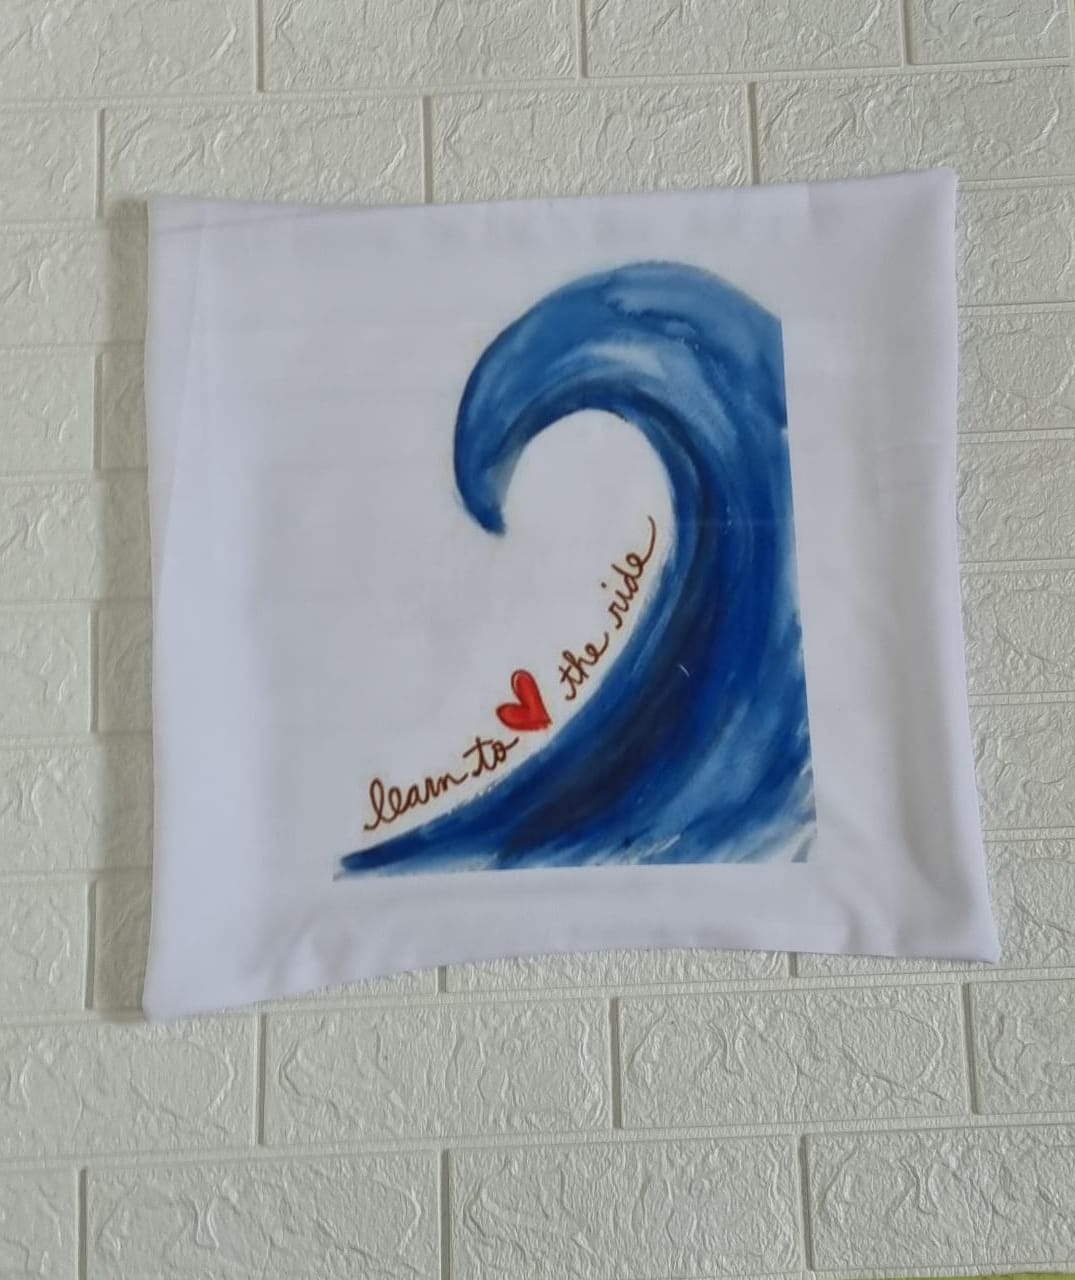  Printed Surfer Scatter Cushion Pillowcase FOR HIRE